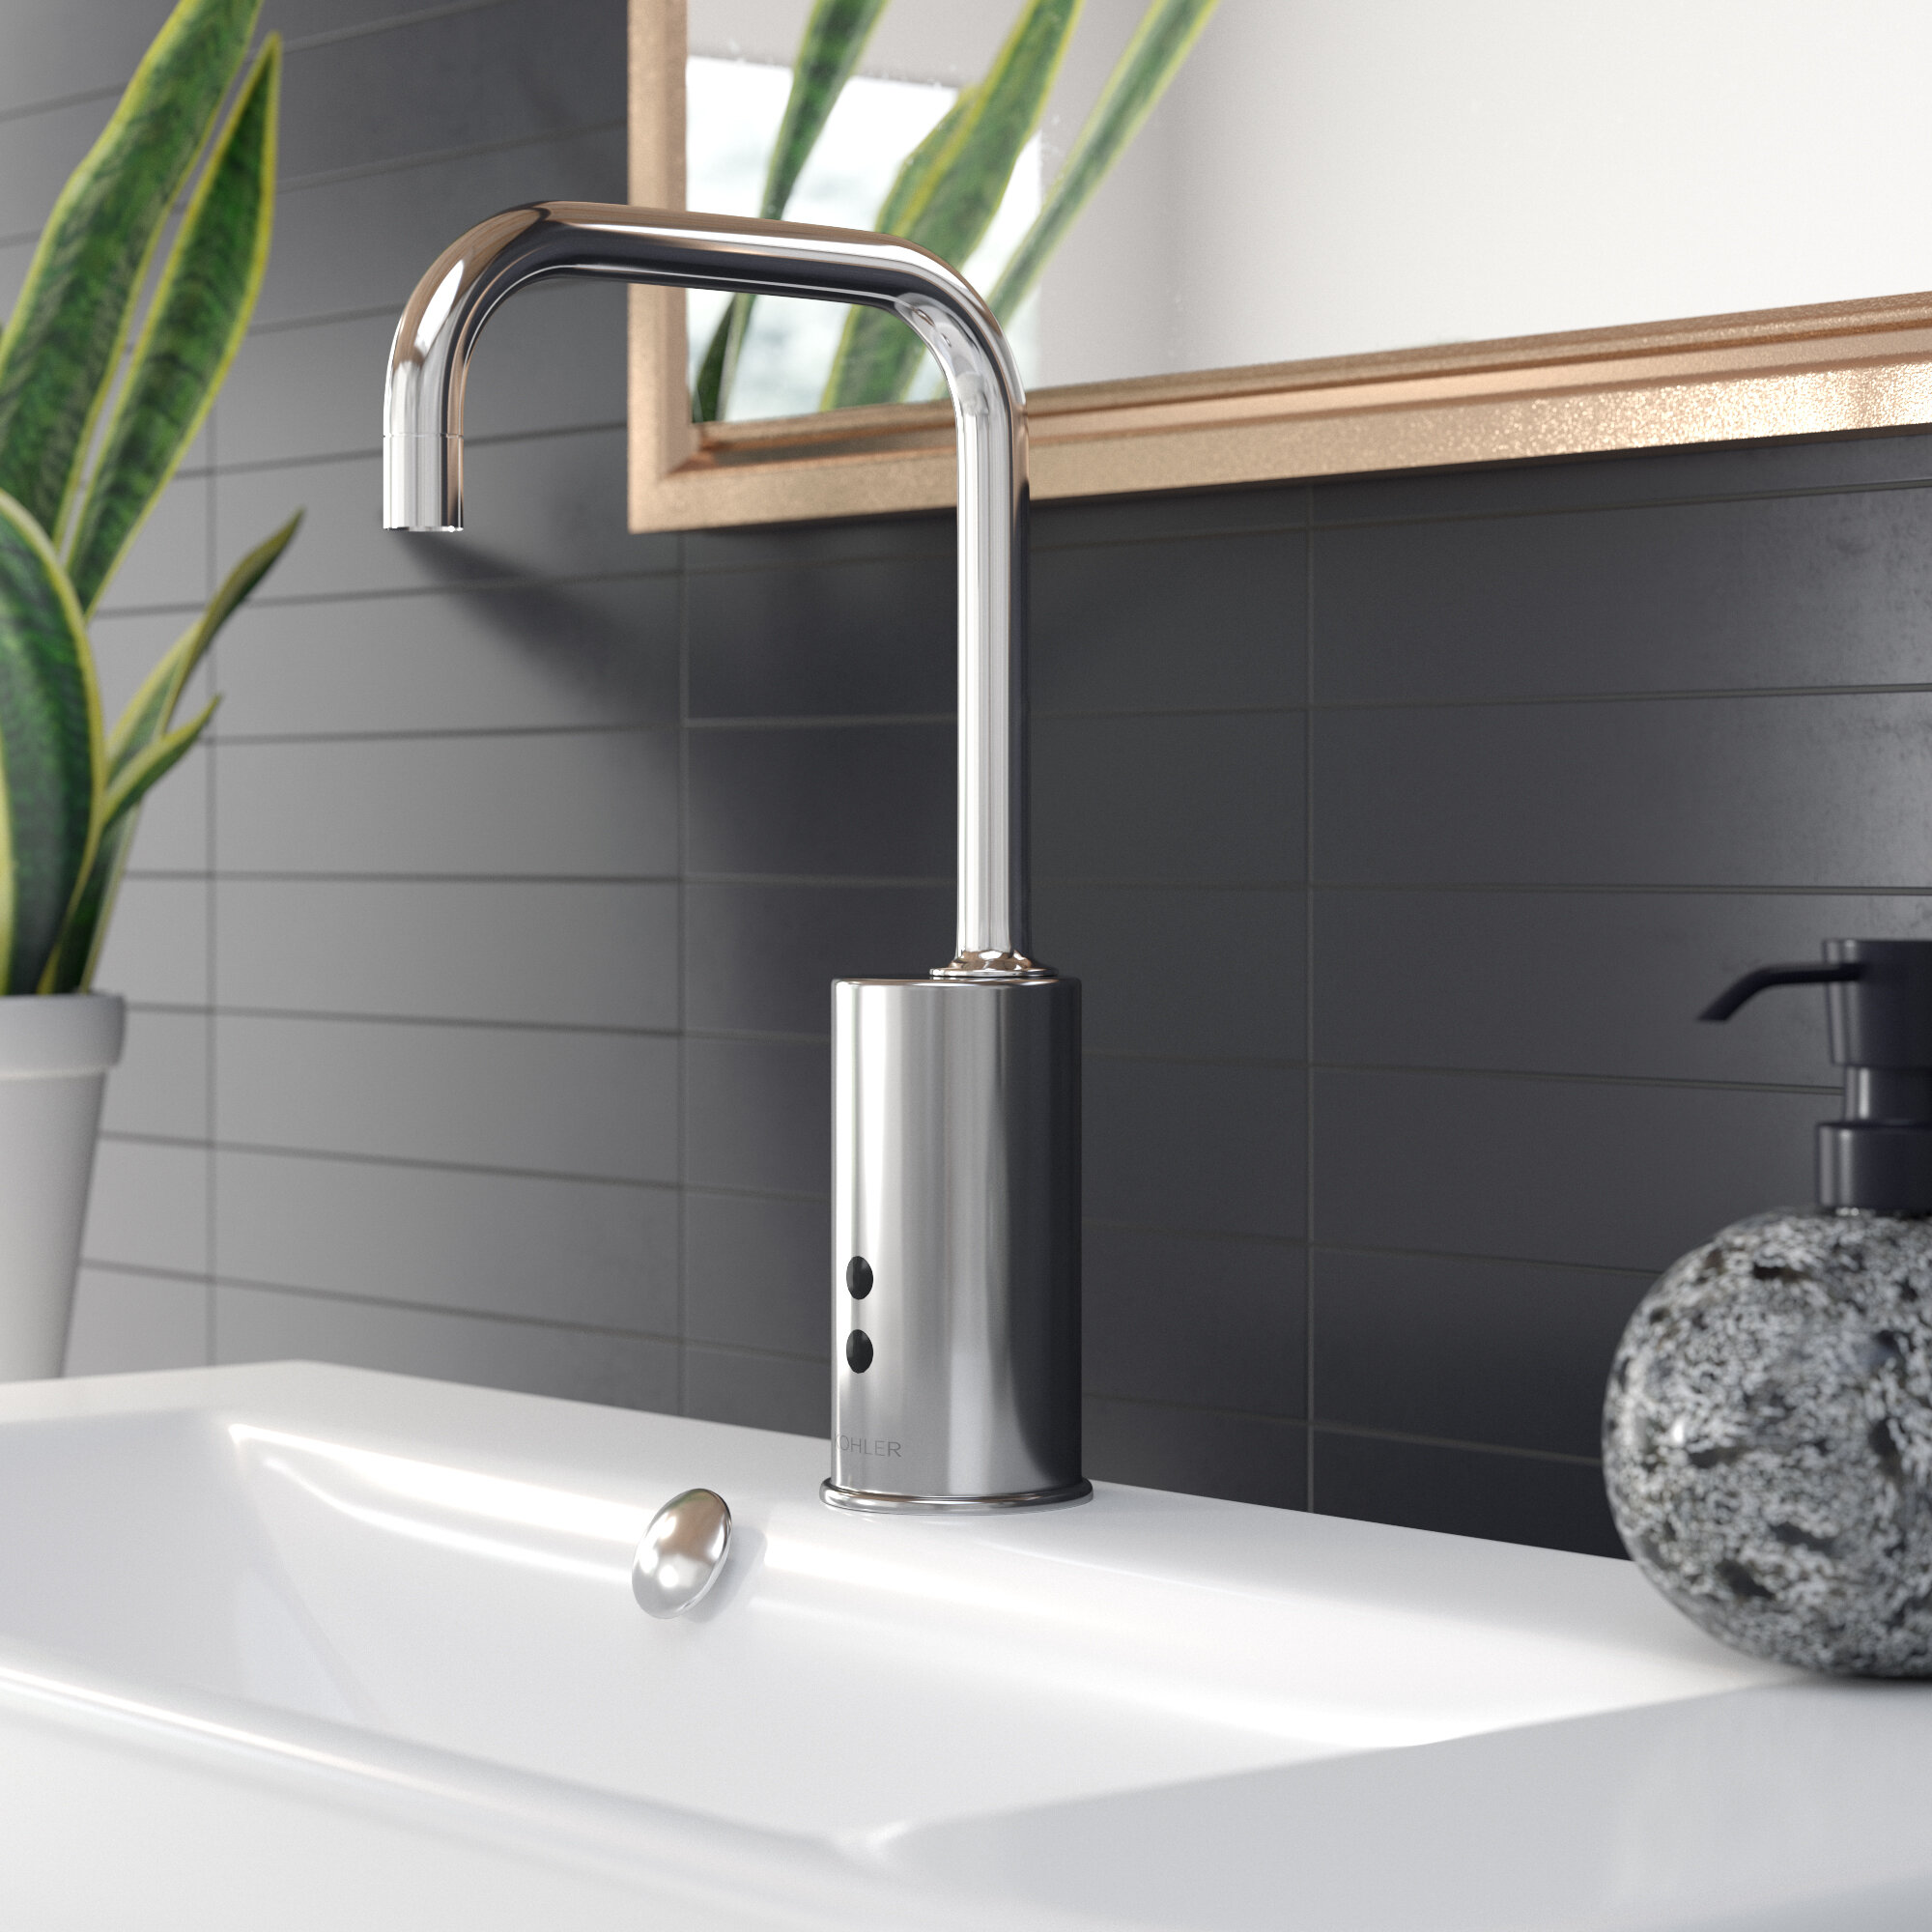 Kohler Gooseneck Single-Hole Touchless Hybrid Energy Cell-Powered  Commercial Faucet with Insight Technology Wayfair